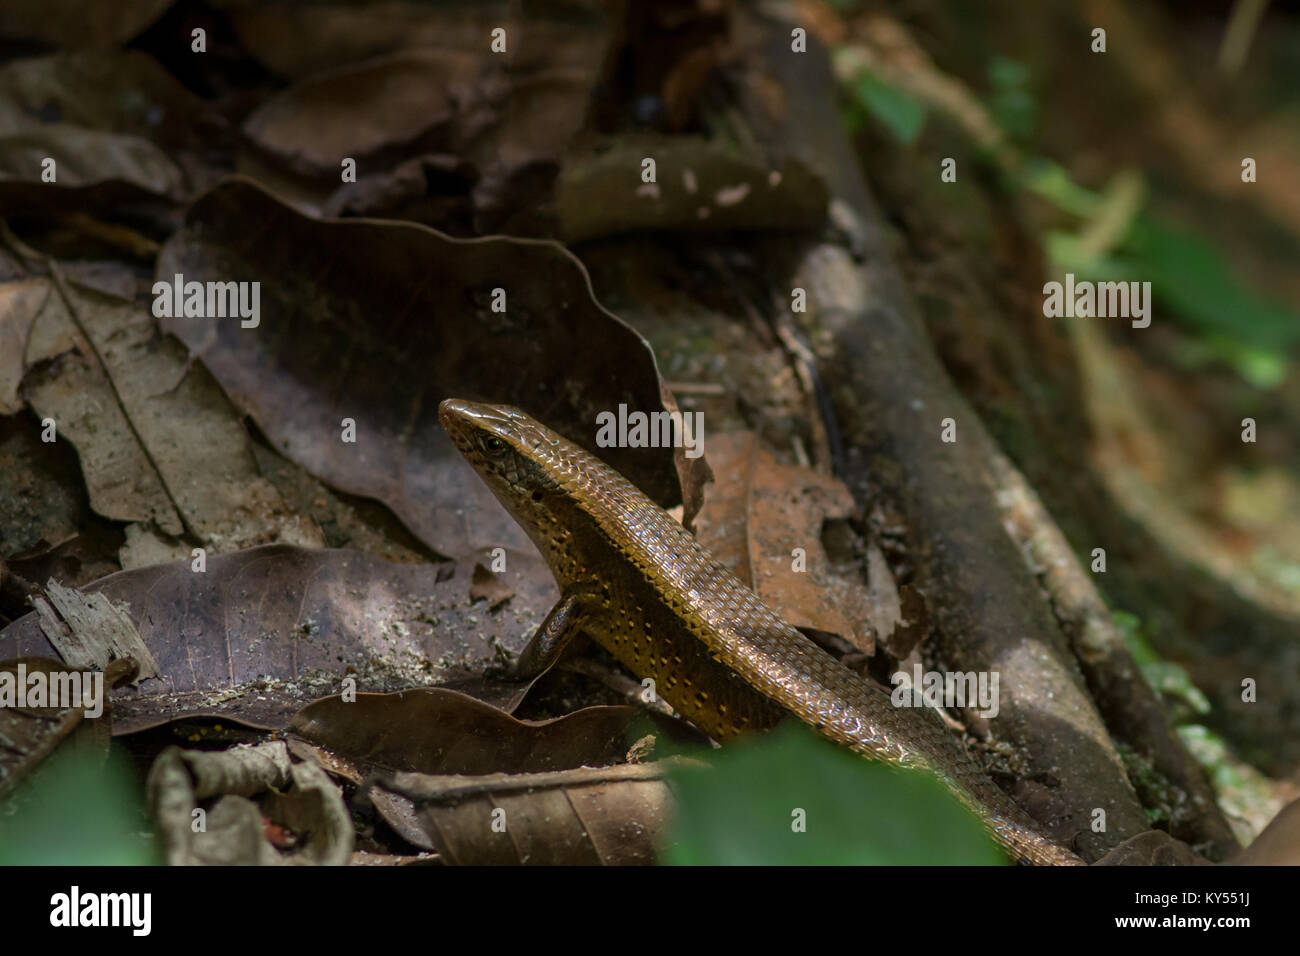 Close up of the upper body and head of a Skink Lizard on the forest floor walking over dead leaves and tree roots. Stock Photo